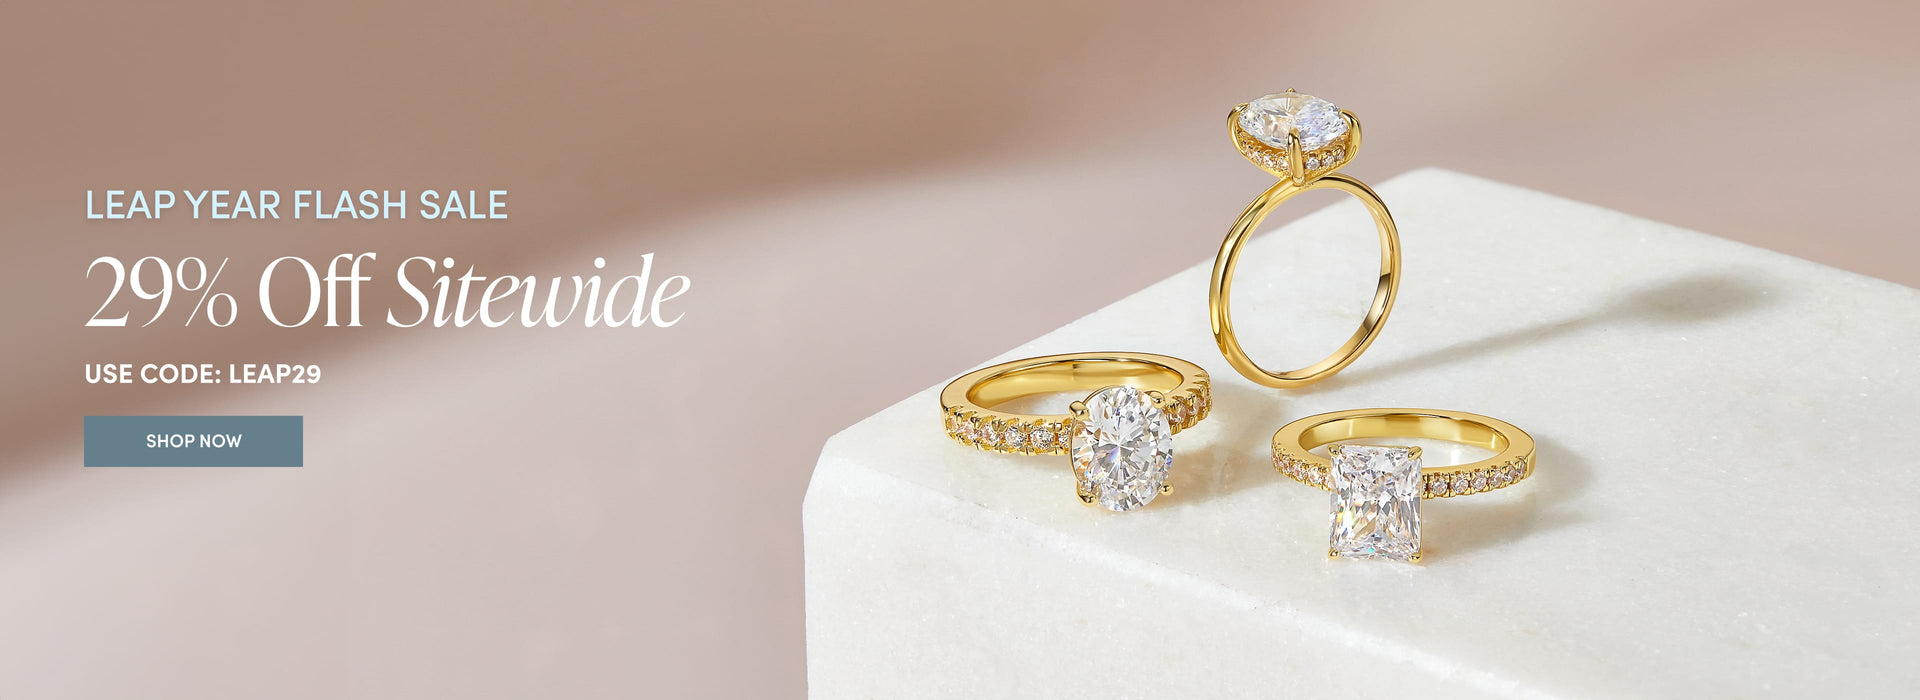 29% off sitewide leap year flash sale with gold engagement rings in stack